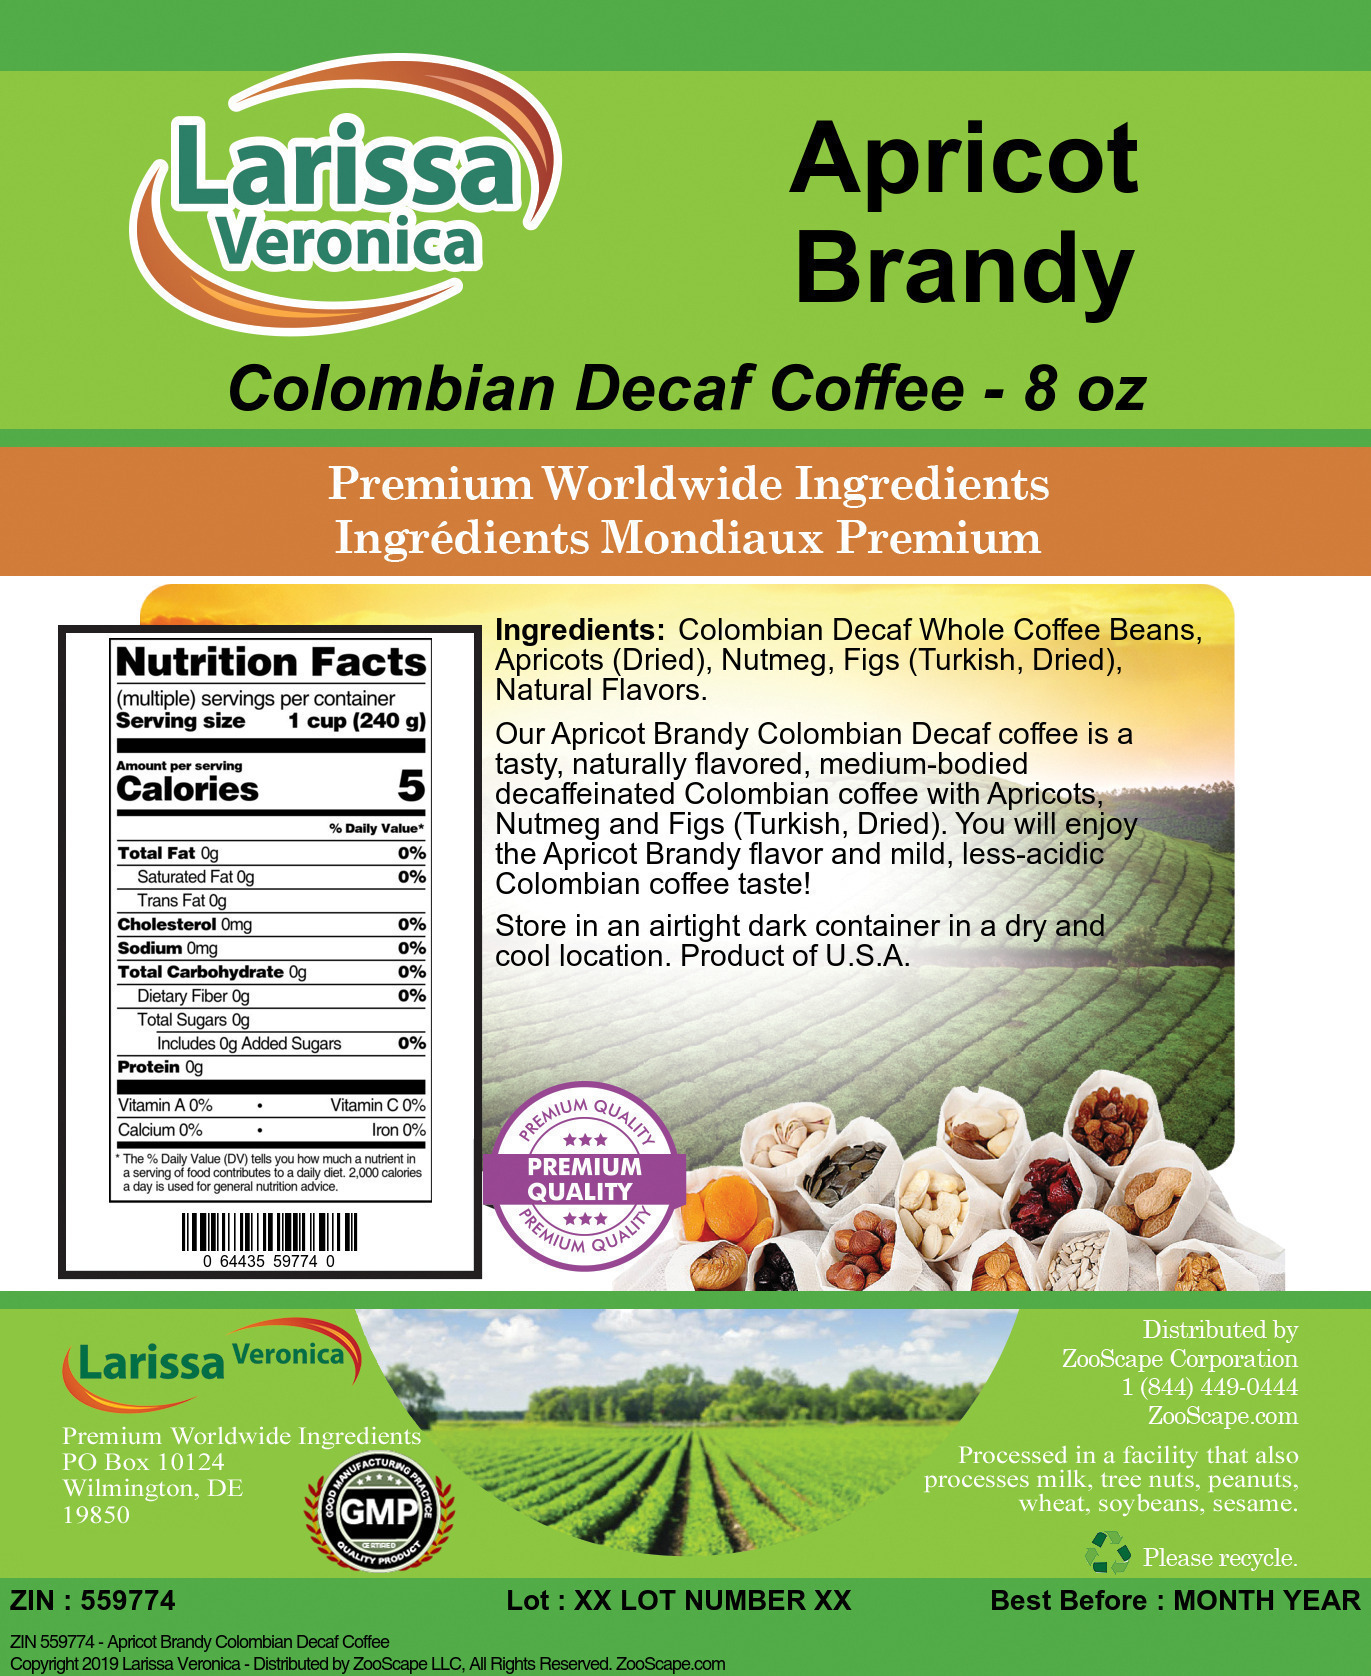 Apricot Brandy Colombian Decaf Coffee - Label